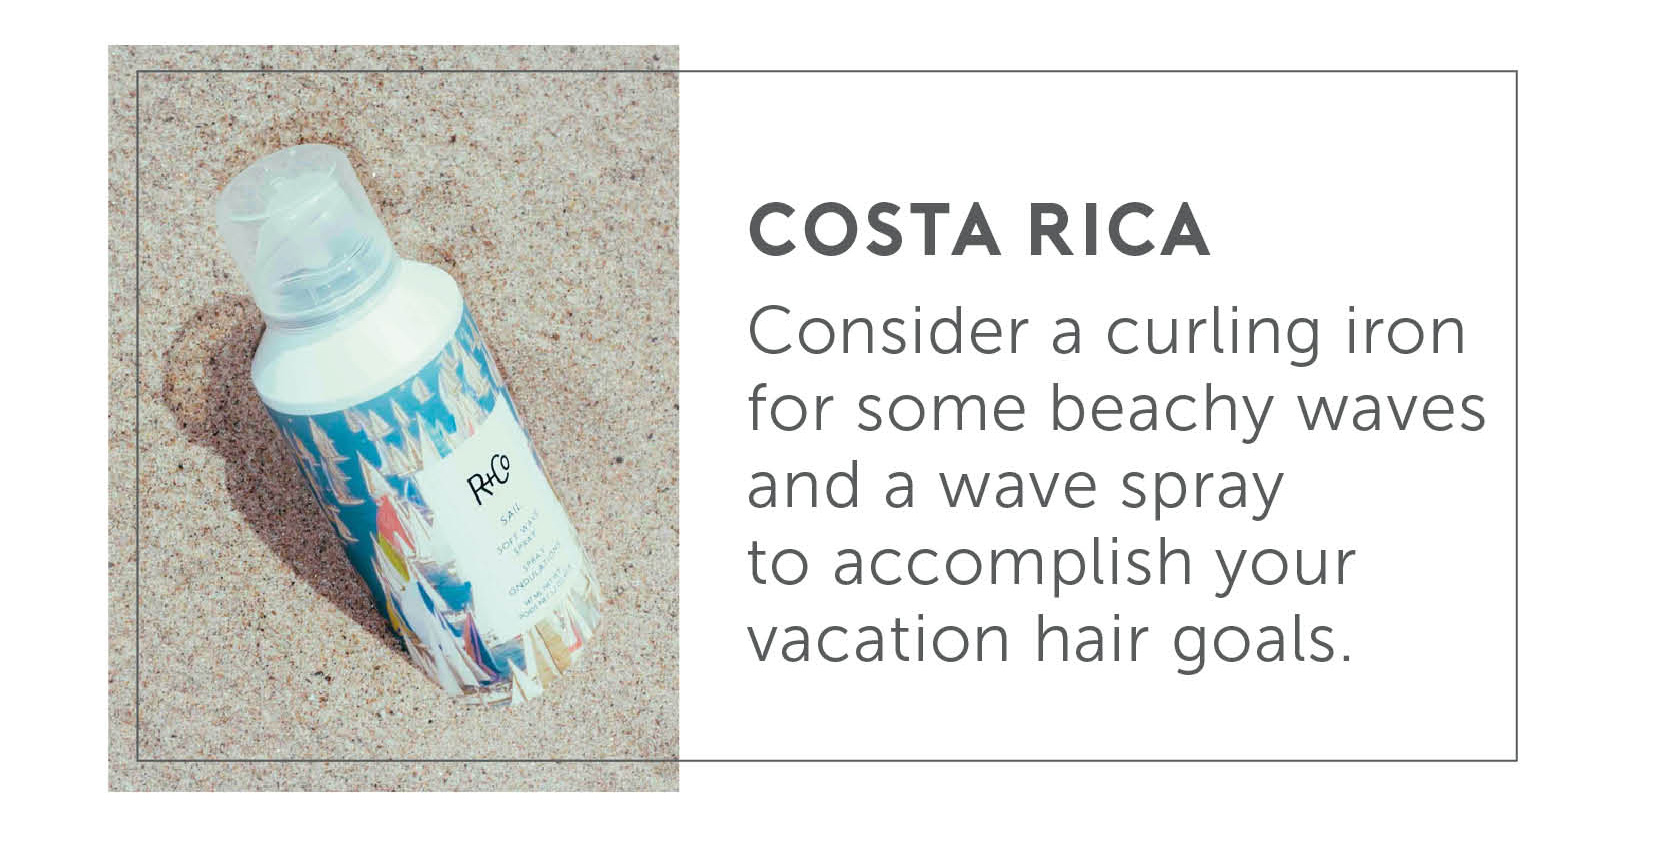 Cost Rica - Consider a curling iron for some beachy waves and a wave spray to accomplish your vacation hair goals.